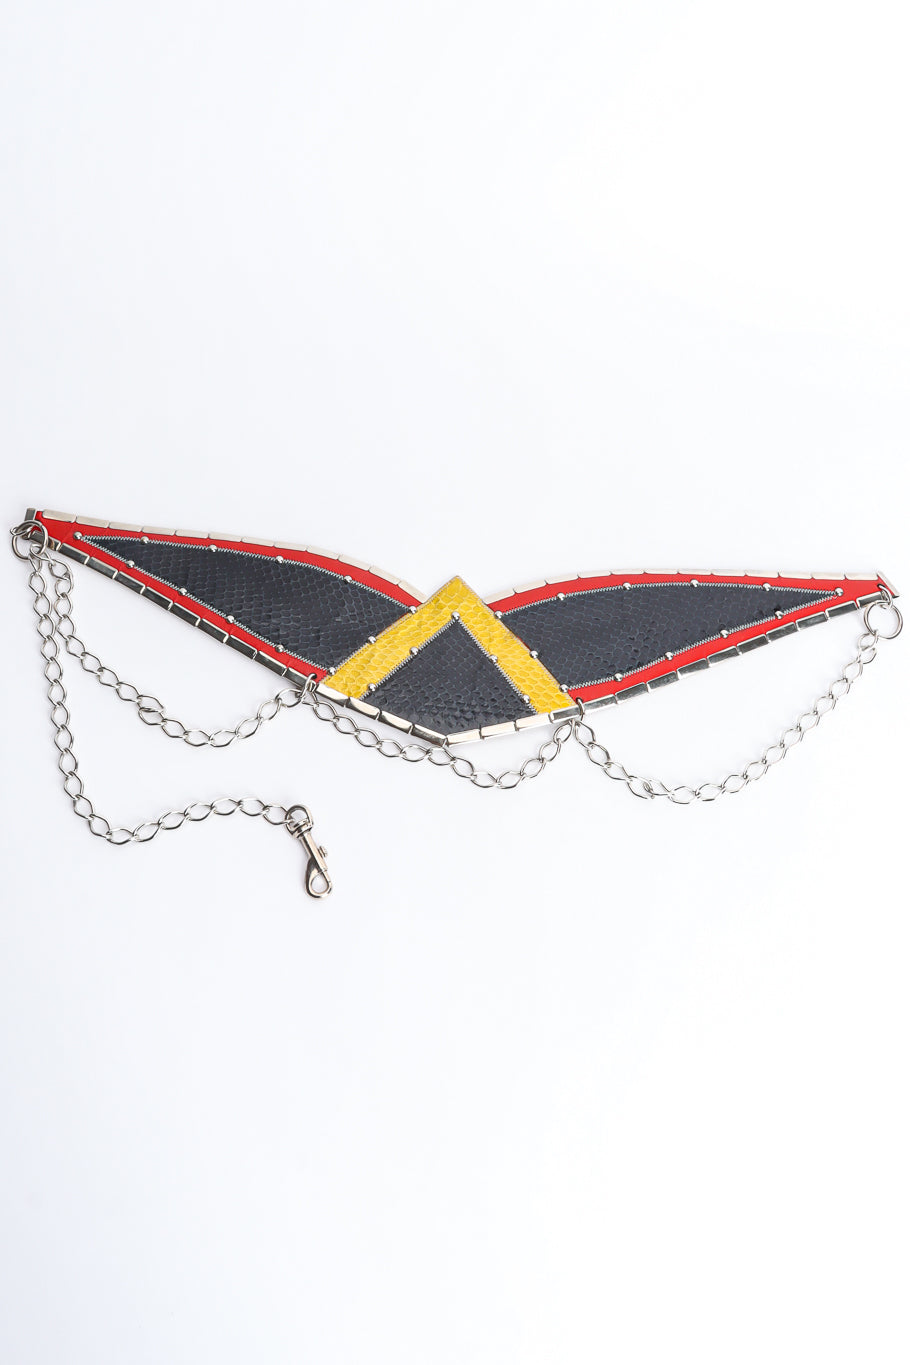 Geometric wing reptile leather belt with silver draped chain detail by Spira horizontal @recessla